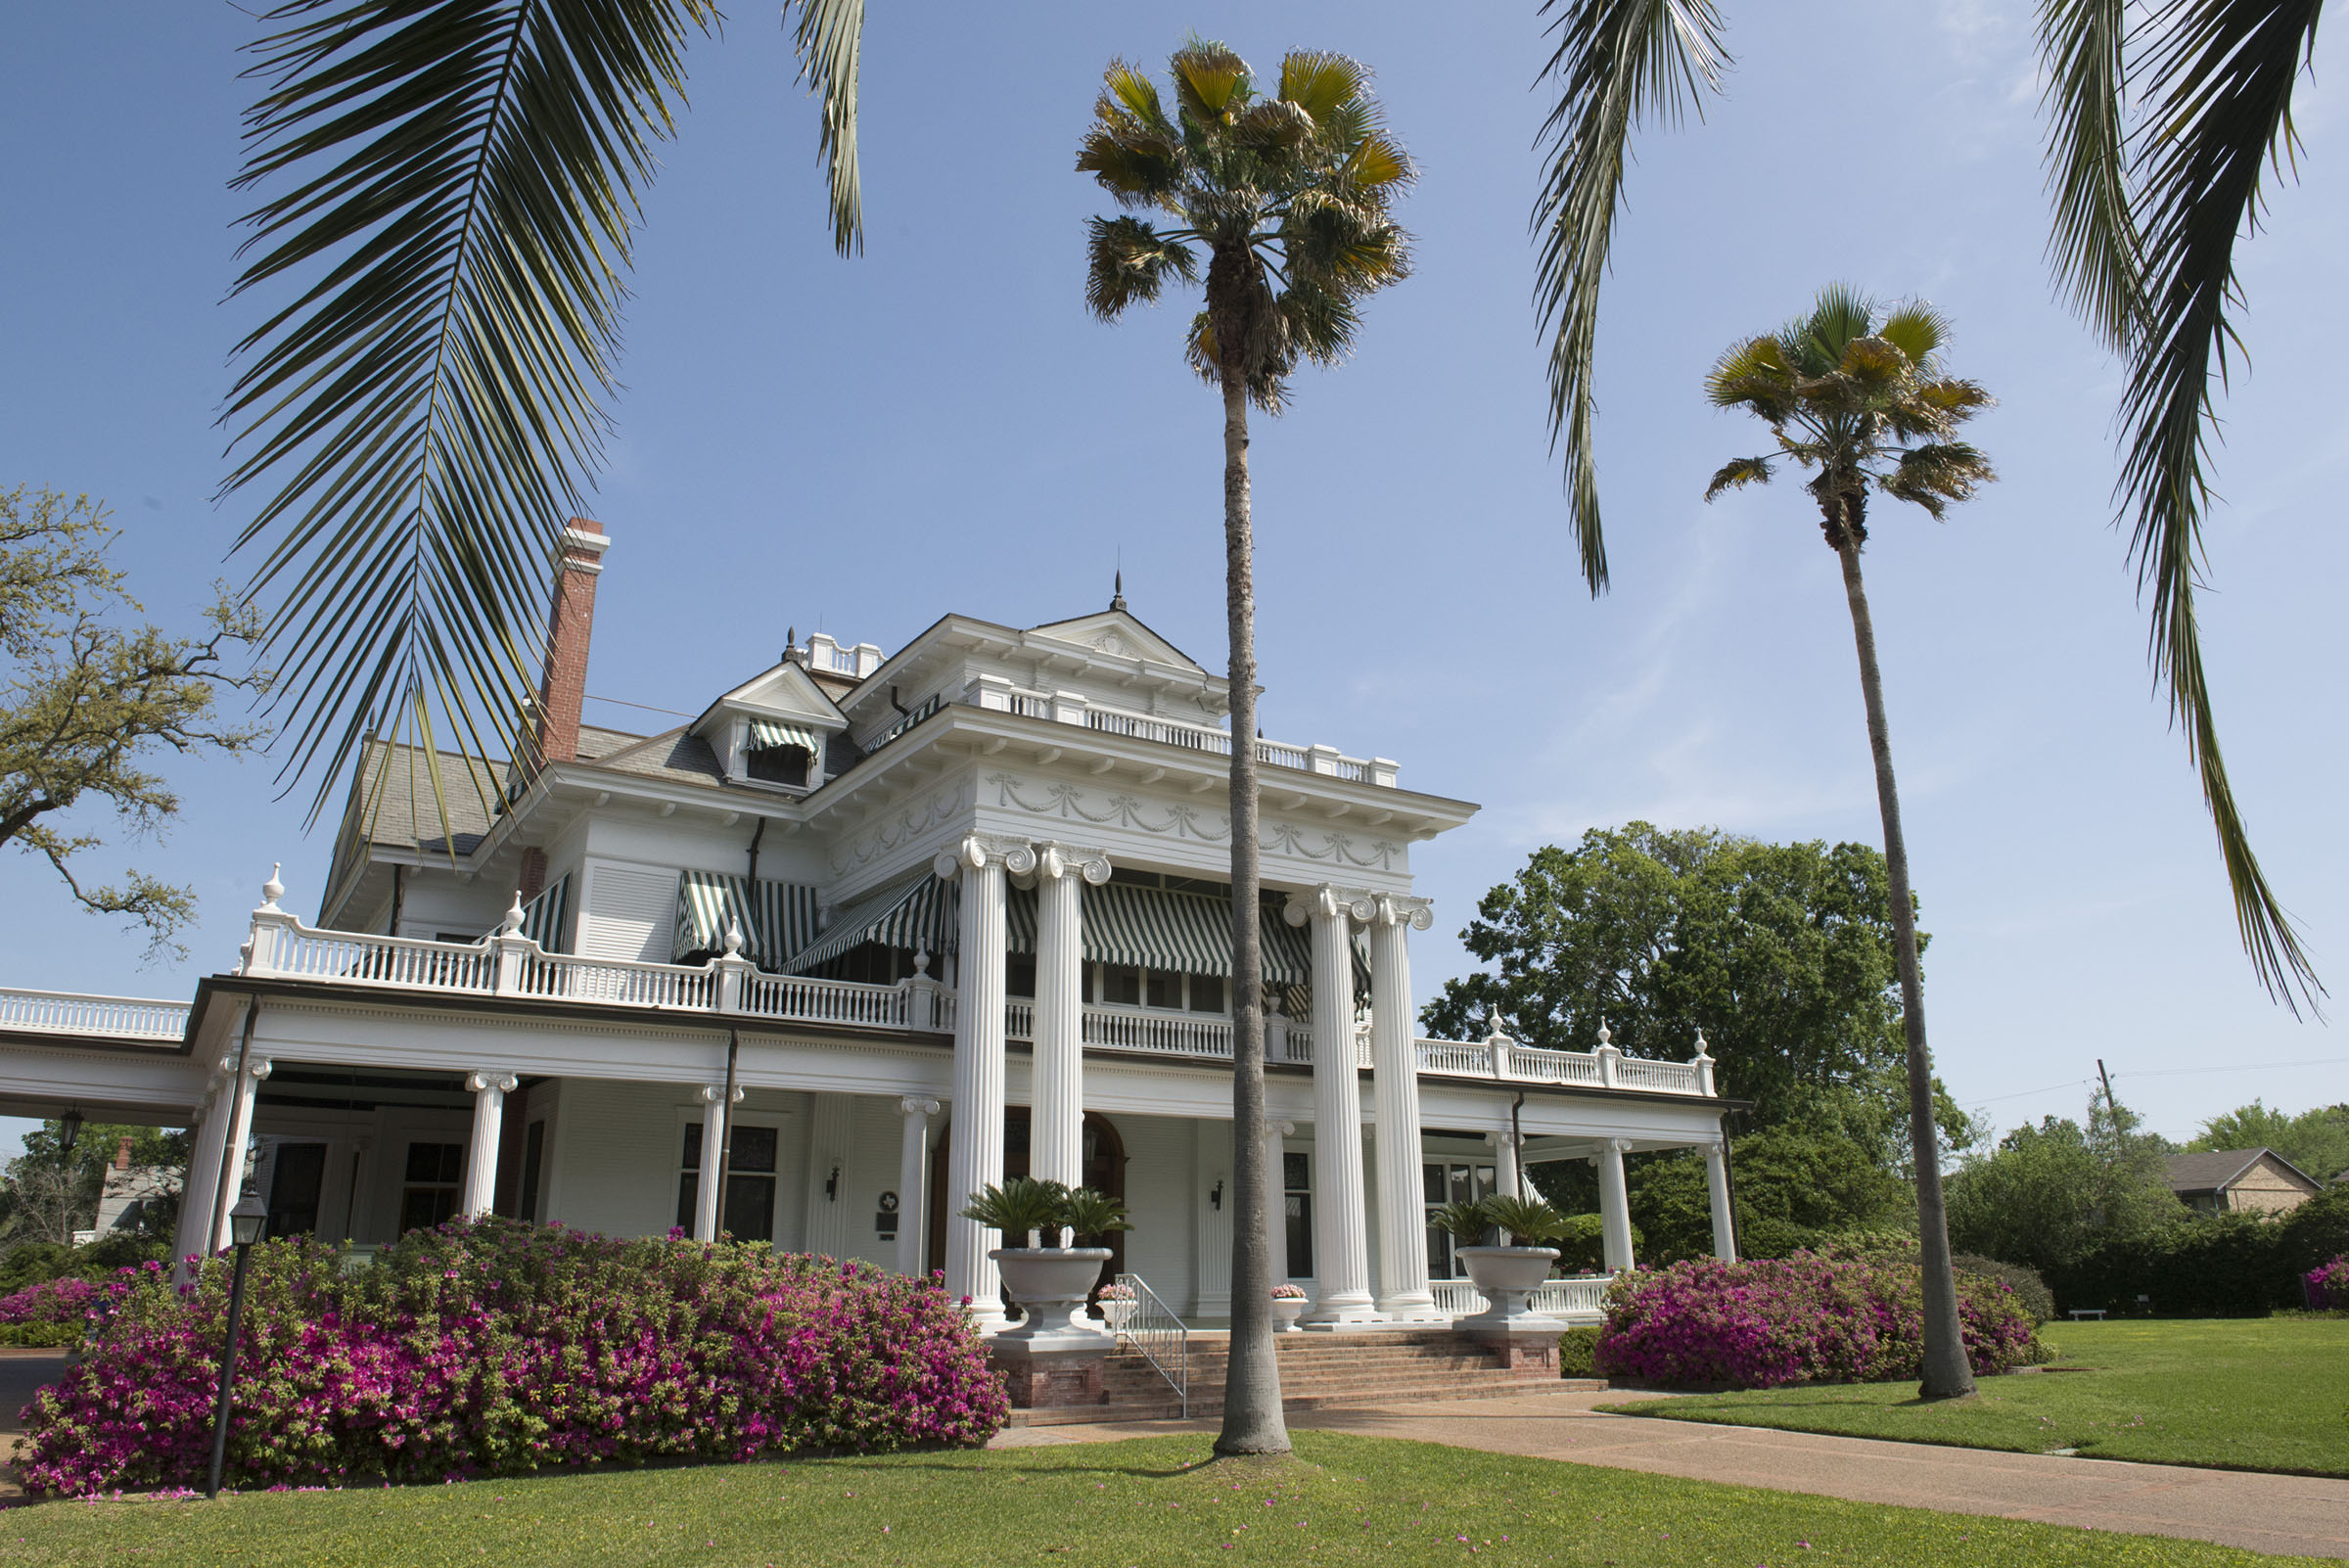 A white, stately building with a deck, pillars, and palm trees